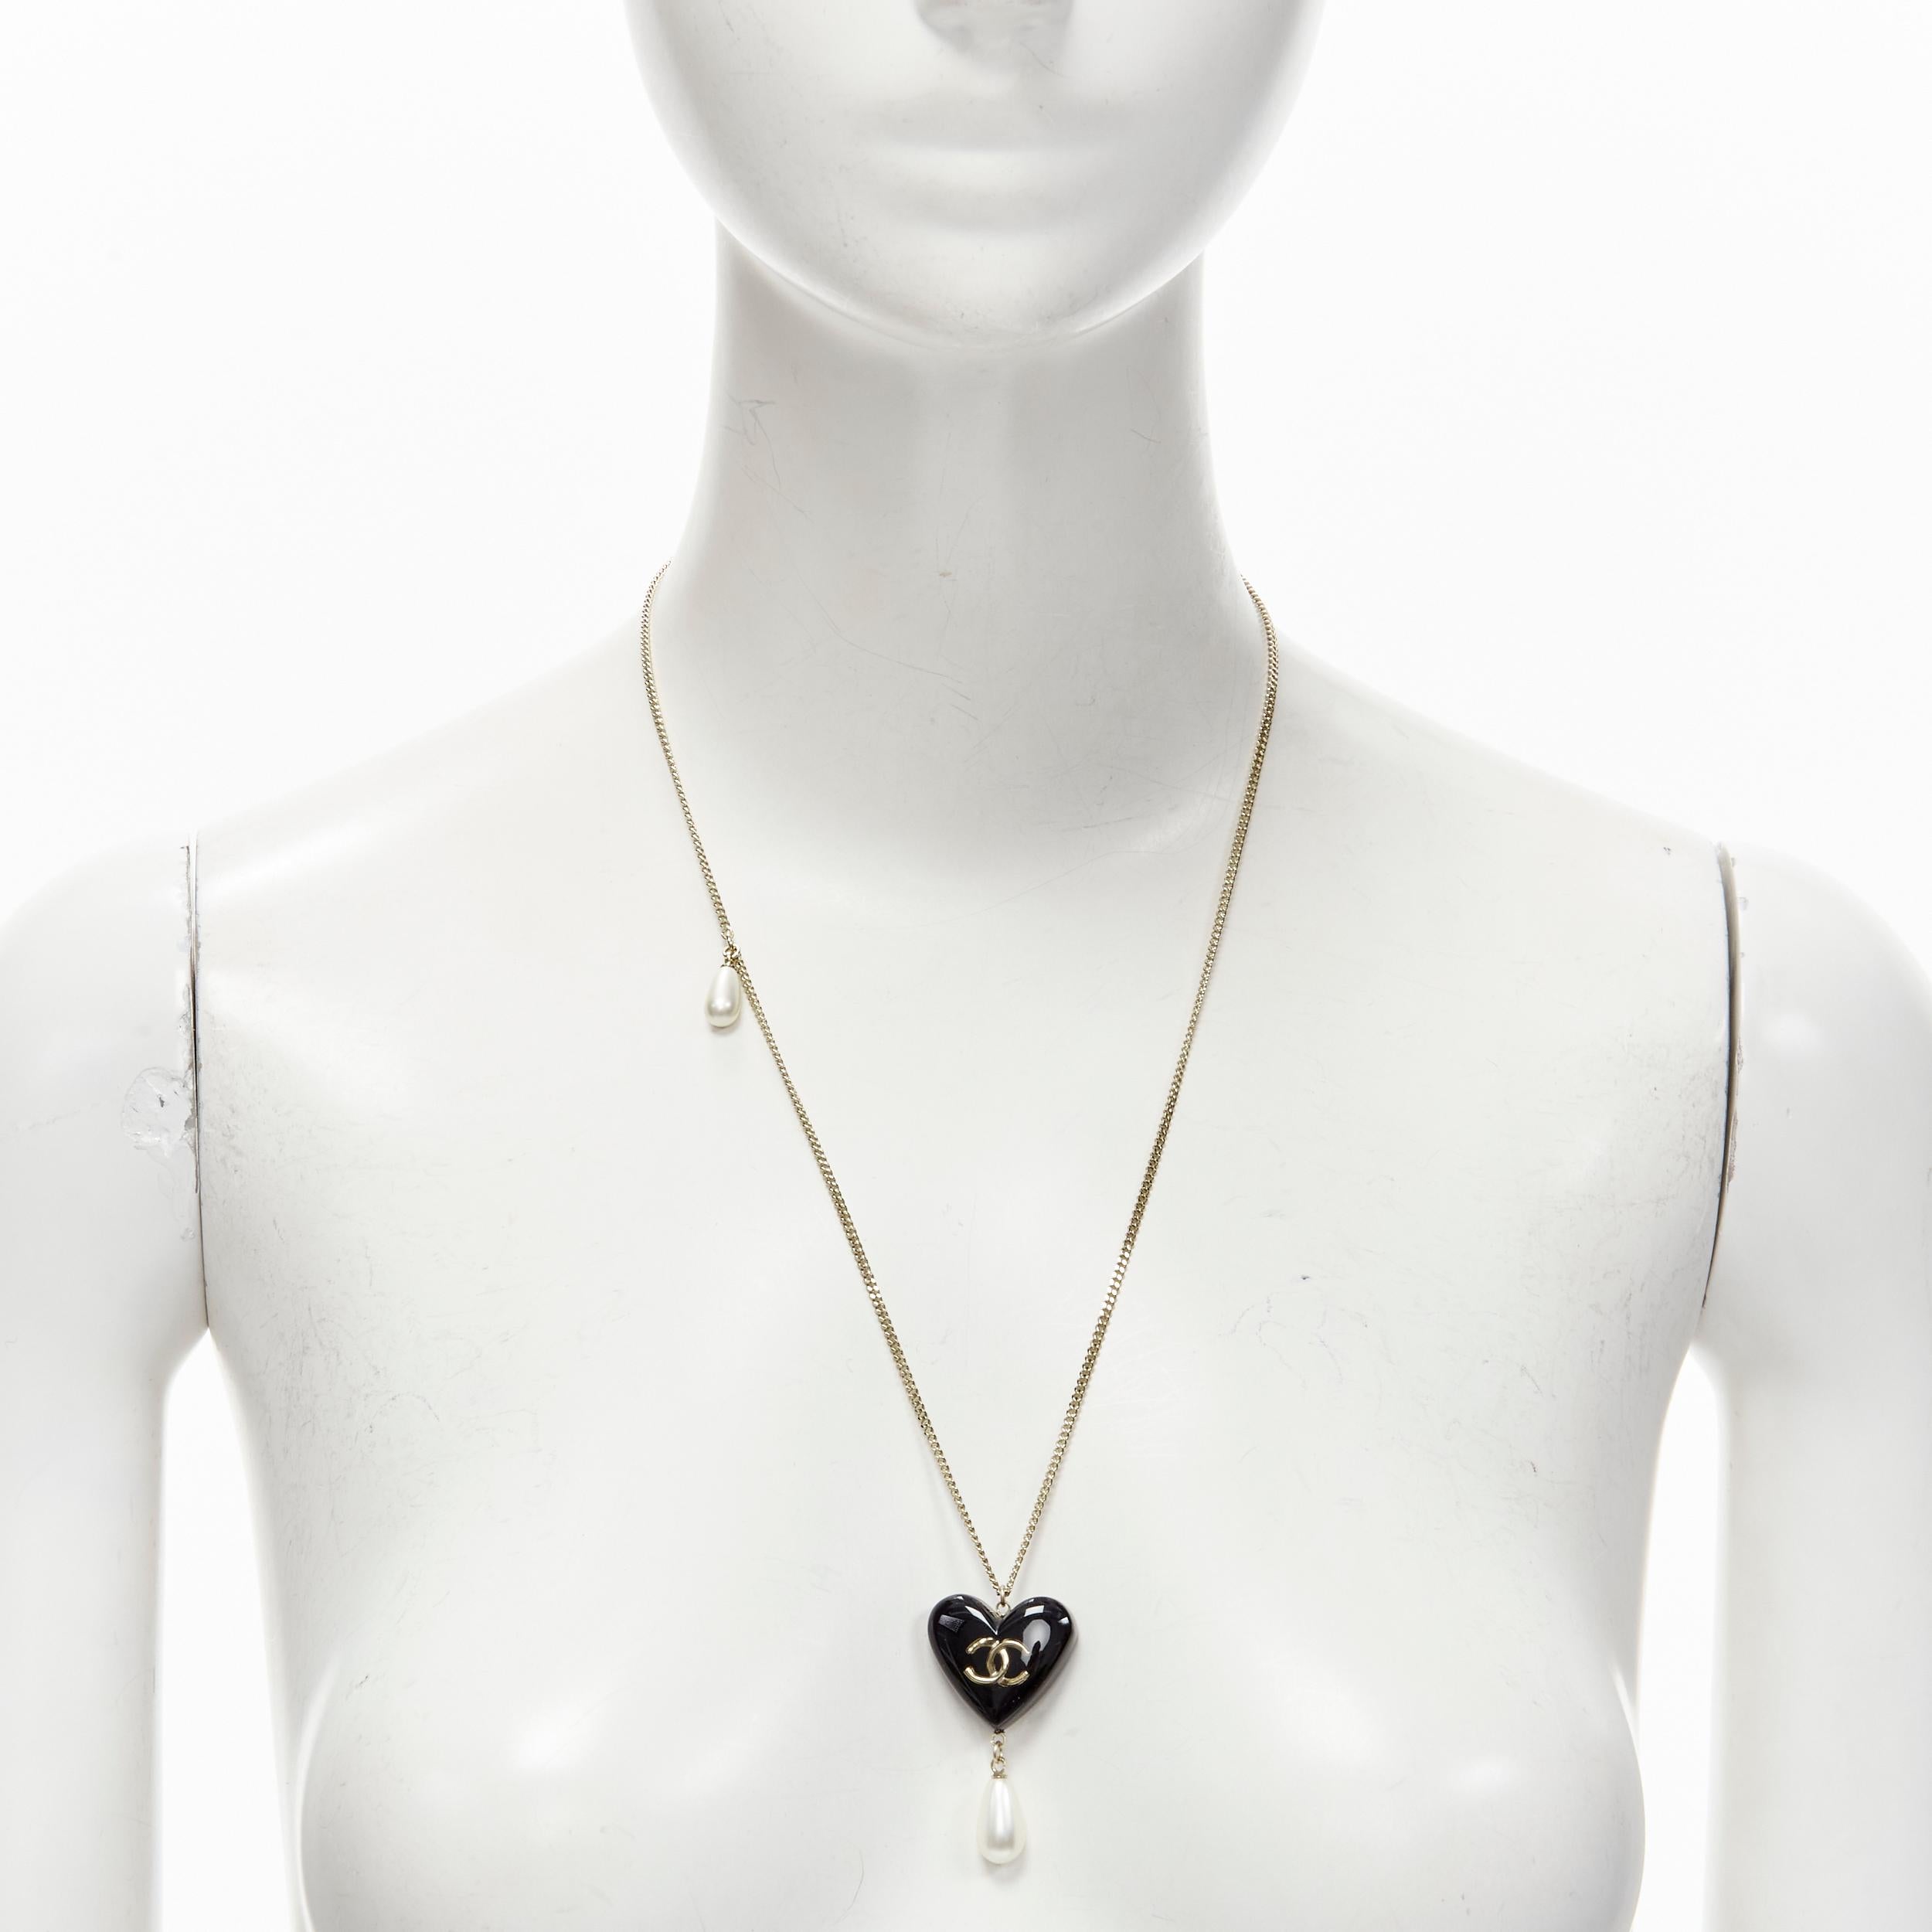 CHANEL B18 B Heart CC logo black resin drop pearl gold necklace
Reference: TGAS/C01561
Brand: Chanel
Designer: Virginie Viard
Material: Metal, Resin
Color: Black, Gold
Pattern: Solid
Closure: Lobster Clasp
Made in: Italy

CONDITION:
Condition: